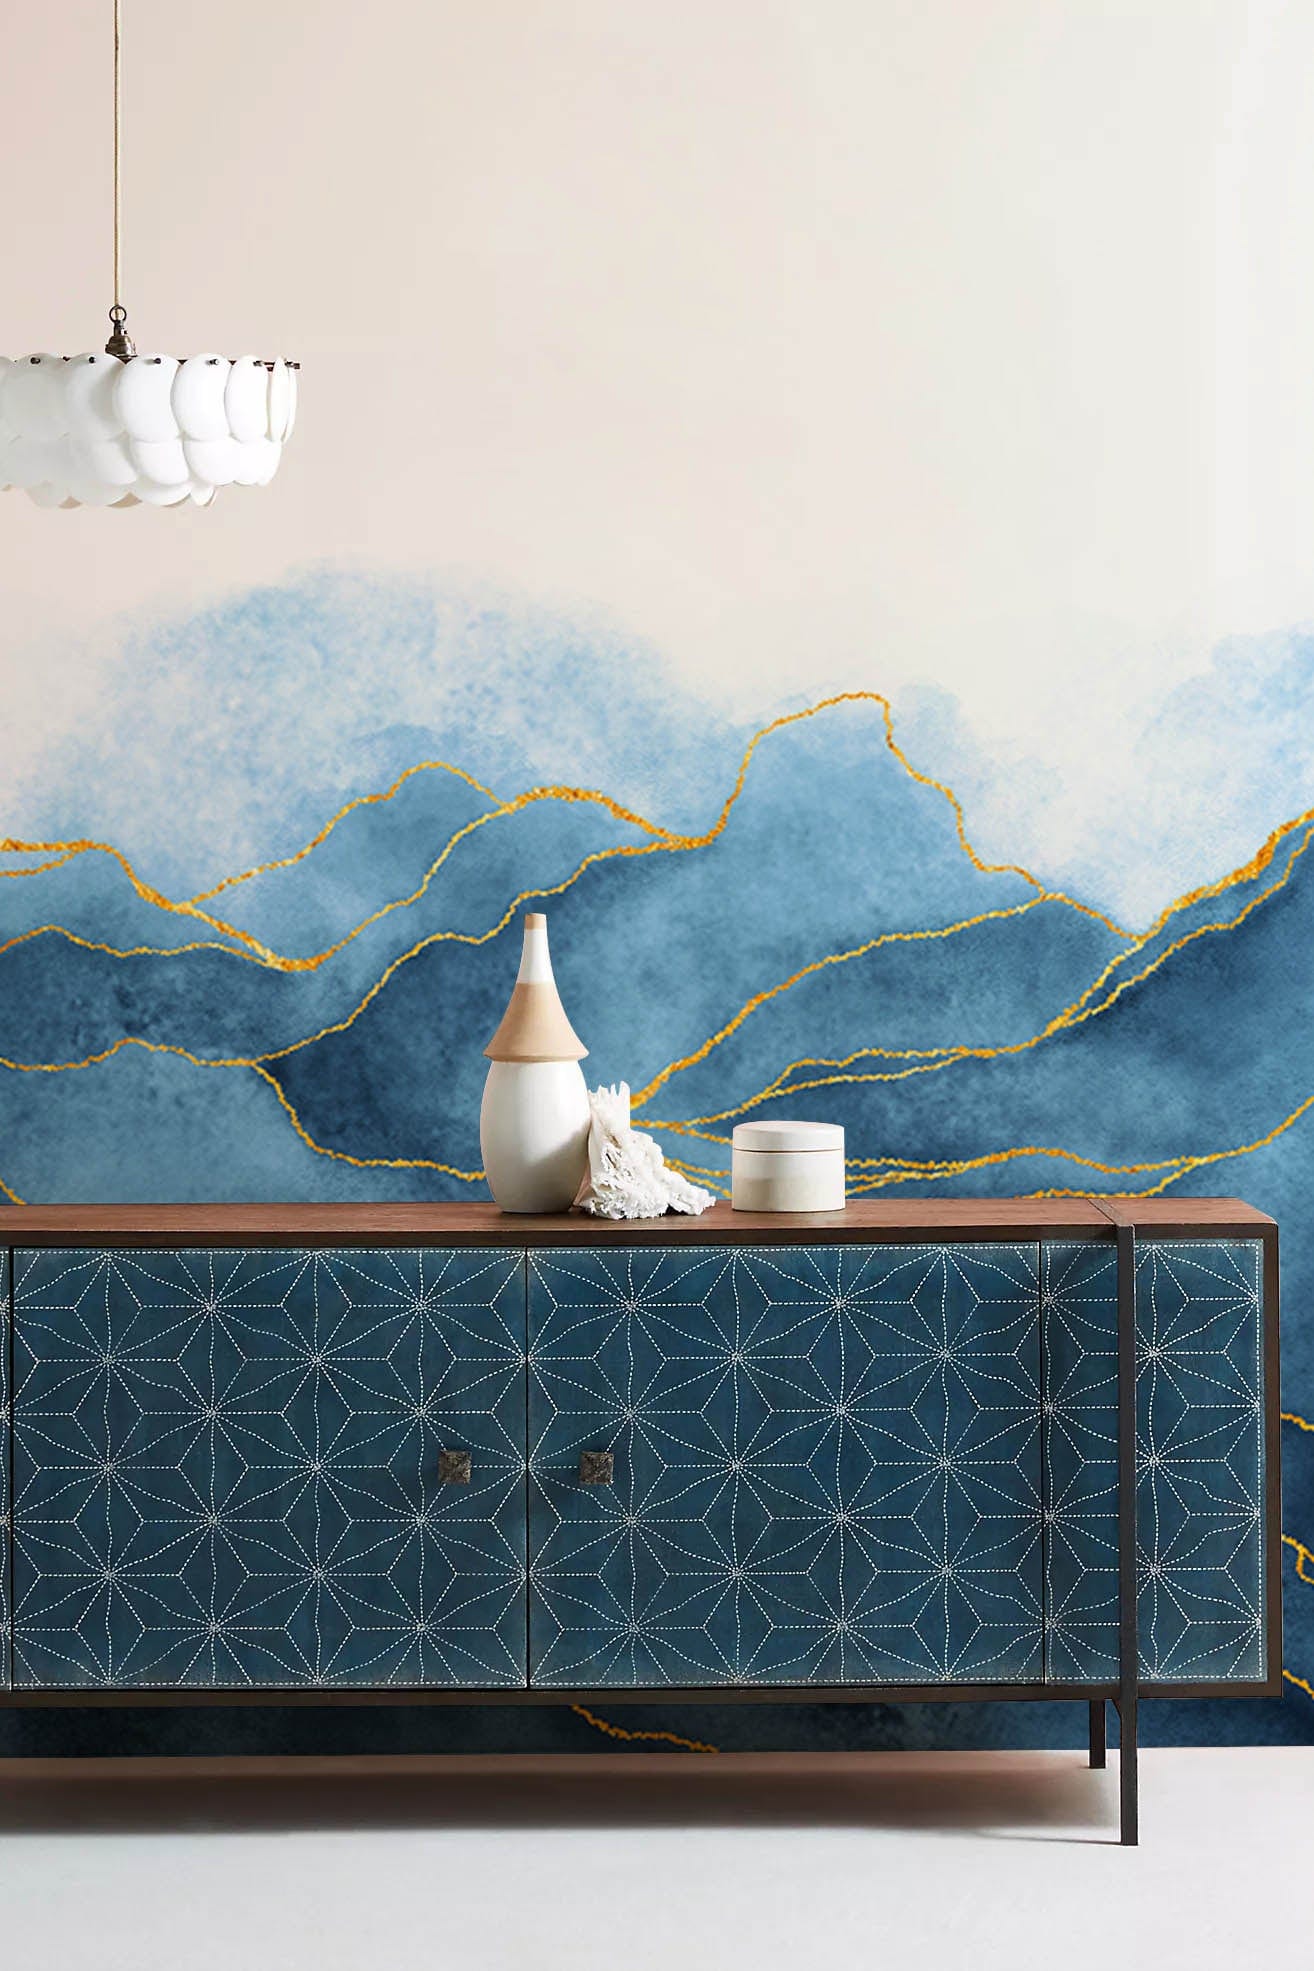 Wallpaper mural for the hallway decorated in a blue watercolour pattern with golden lines